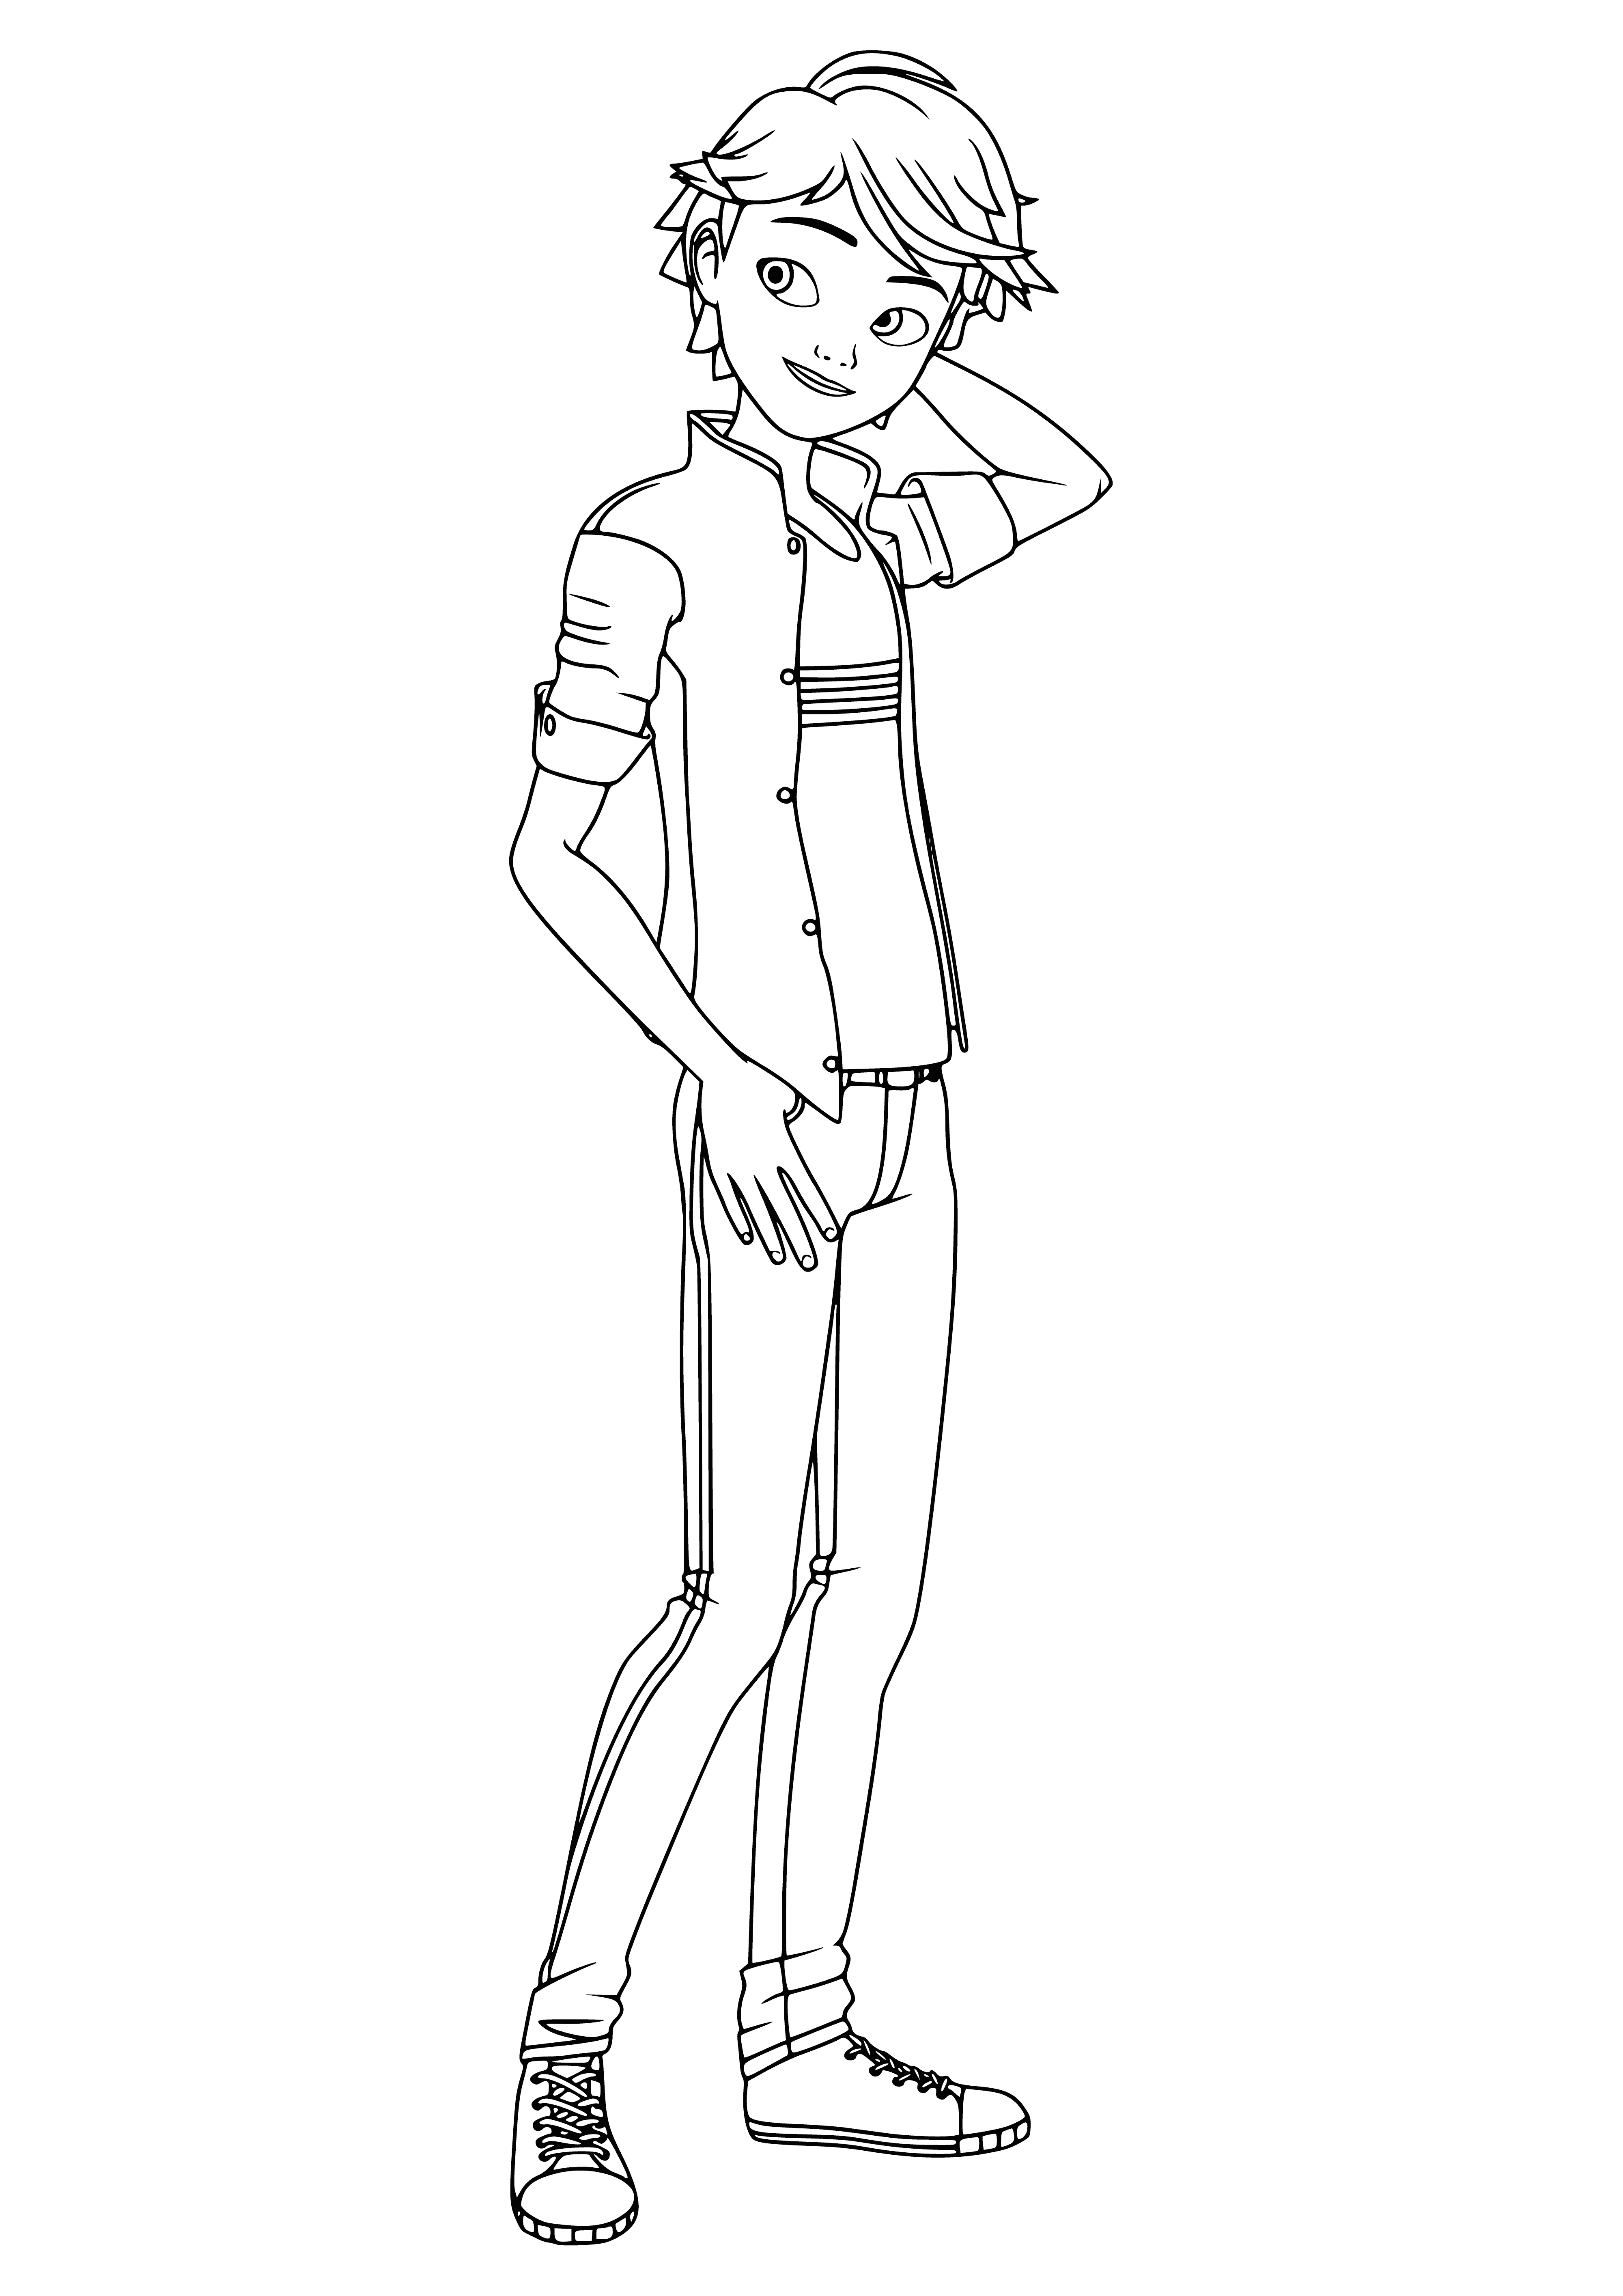 Adrian Agrest coloring page